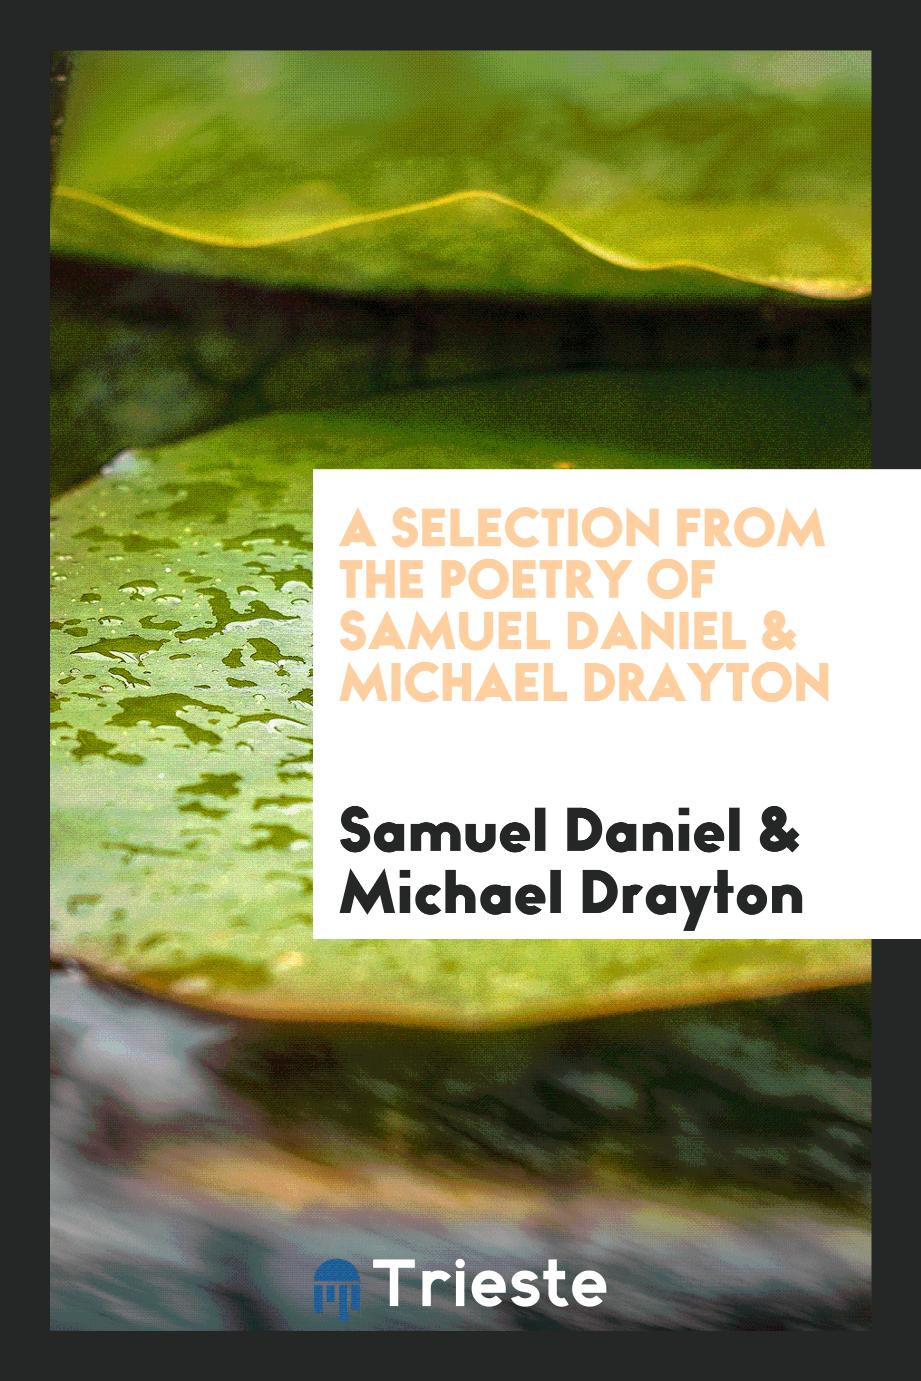 A selection from the poetry of Samuel Daniel & Michael Drayton